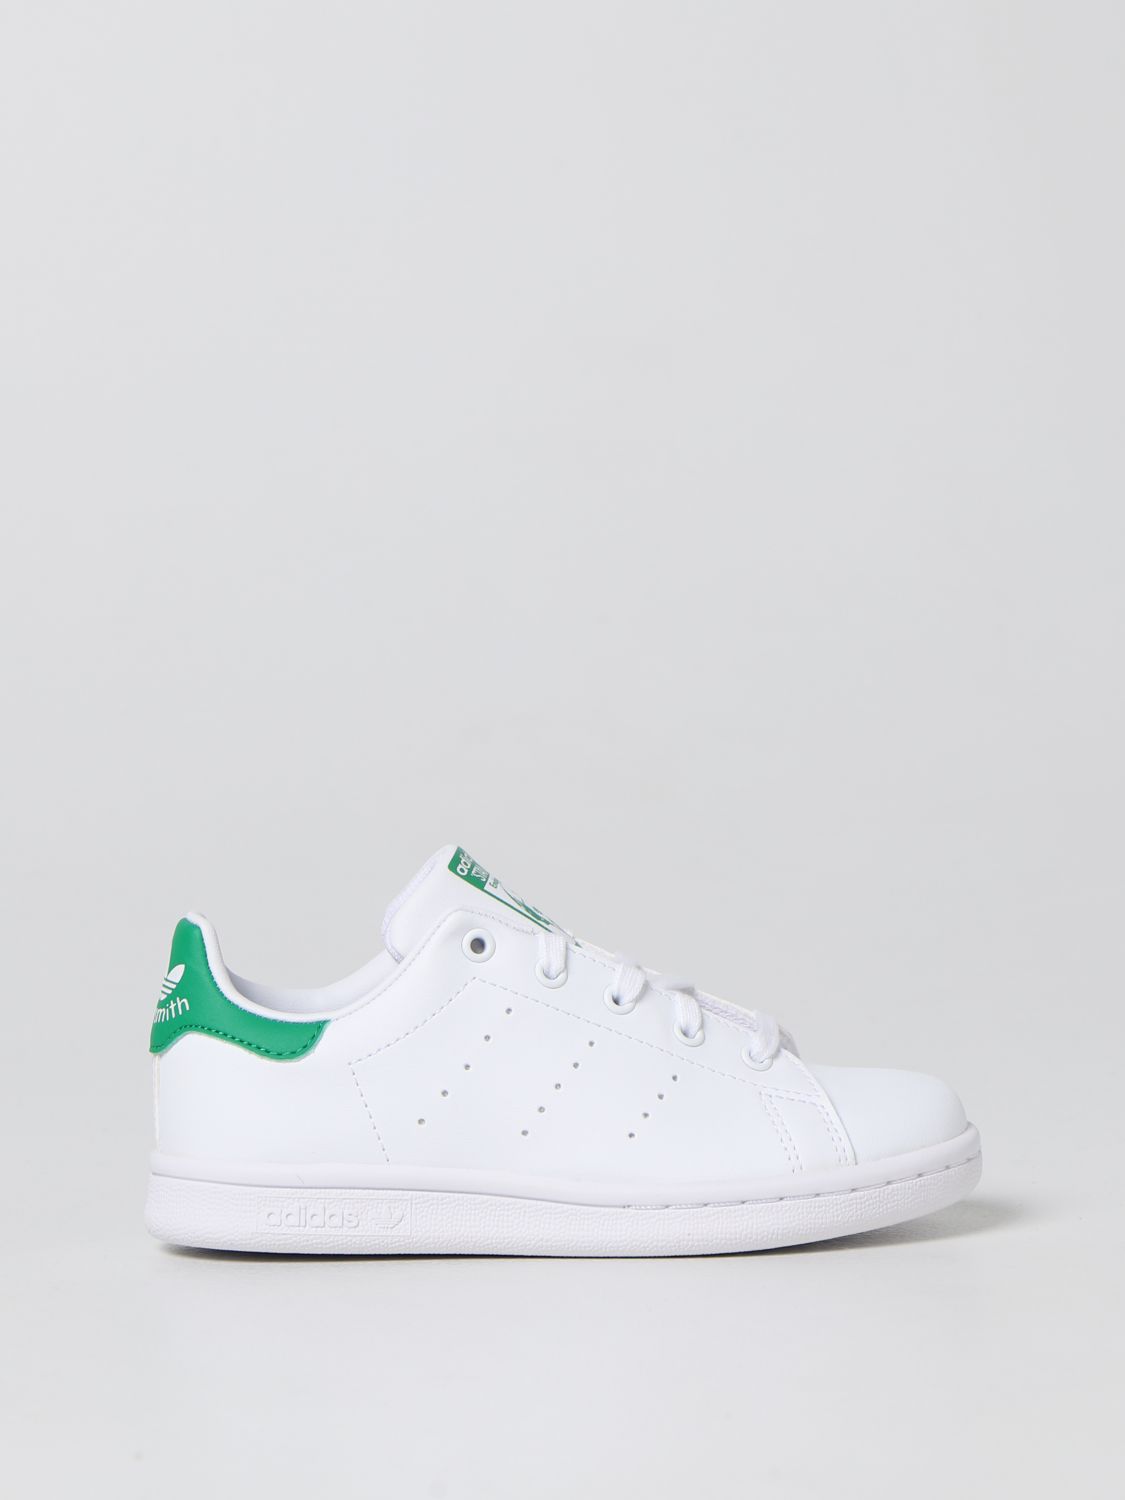 ADIDAS ORIGINALS STAN SMITH C ADIDAS ORIGINALS TRAINERS IN SYNTHETIC LEATHER,352318001